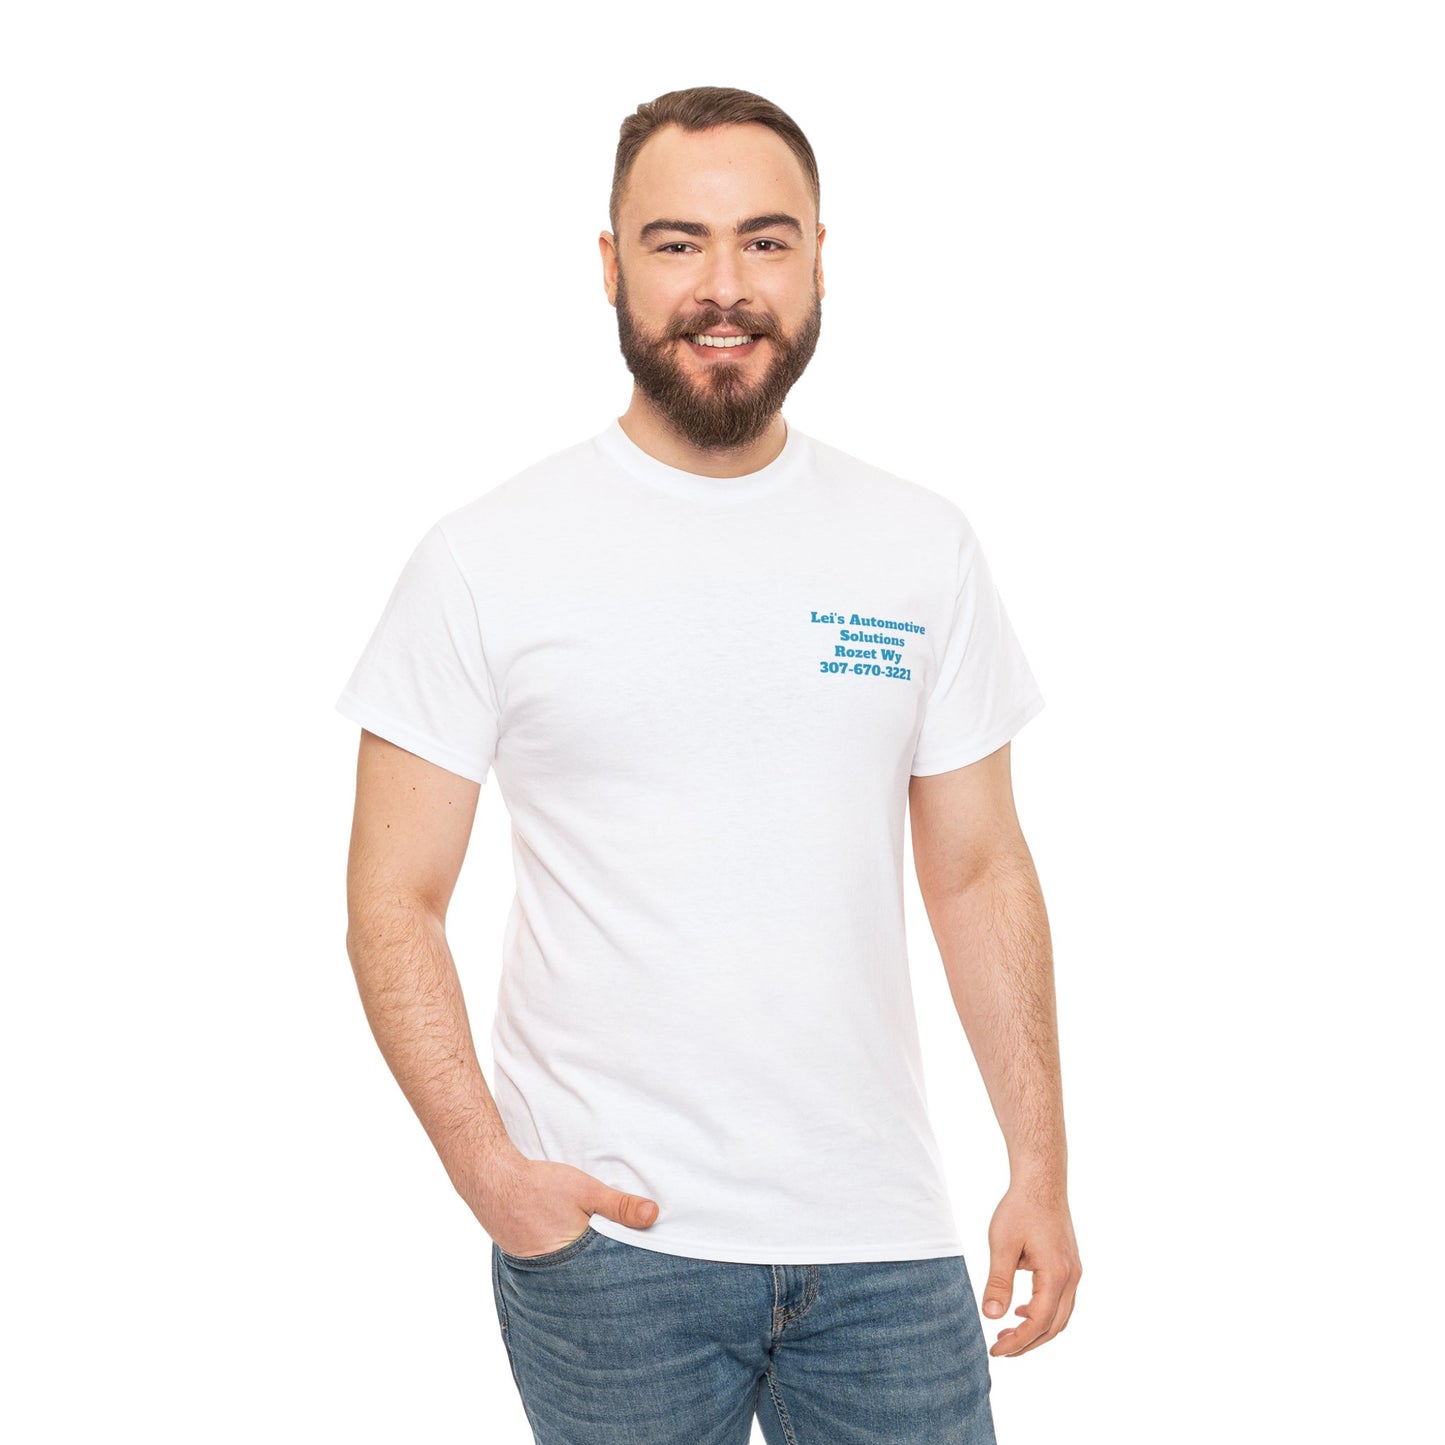 Personalized Tees Just for your Business!